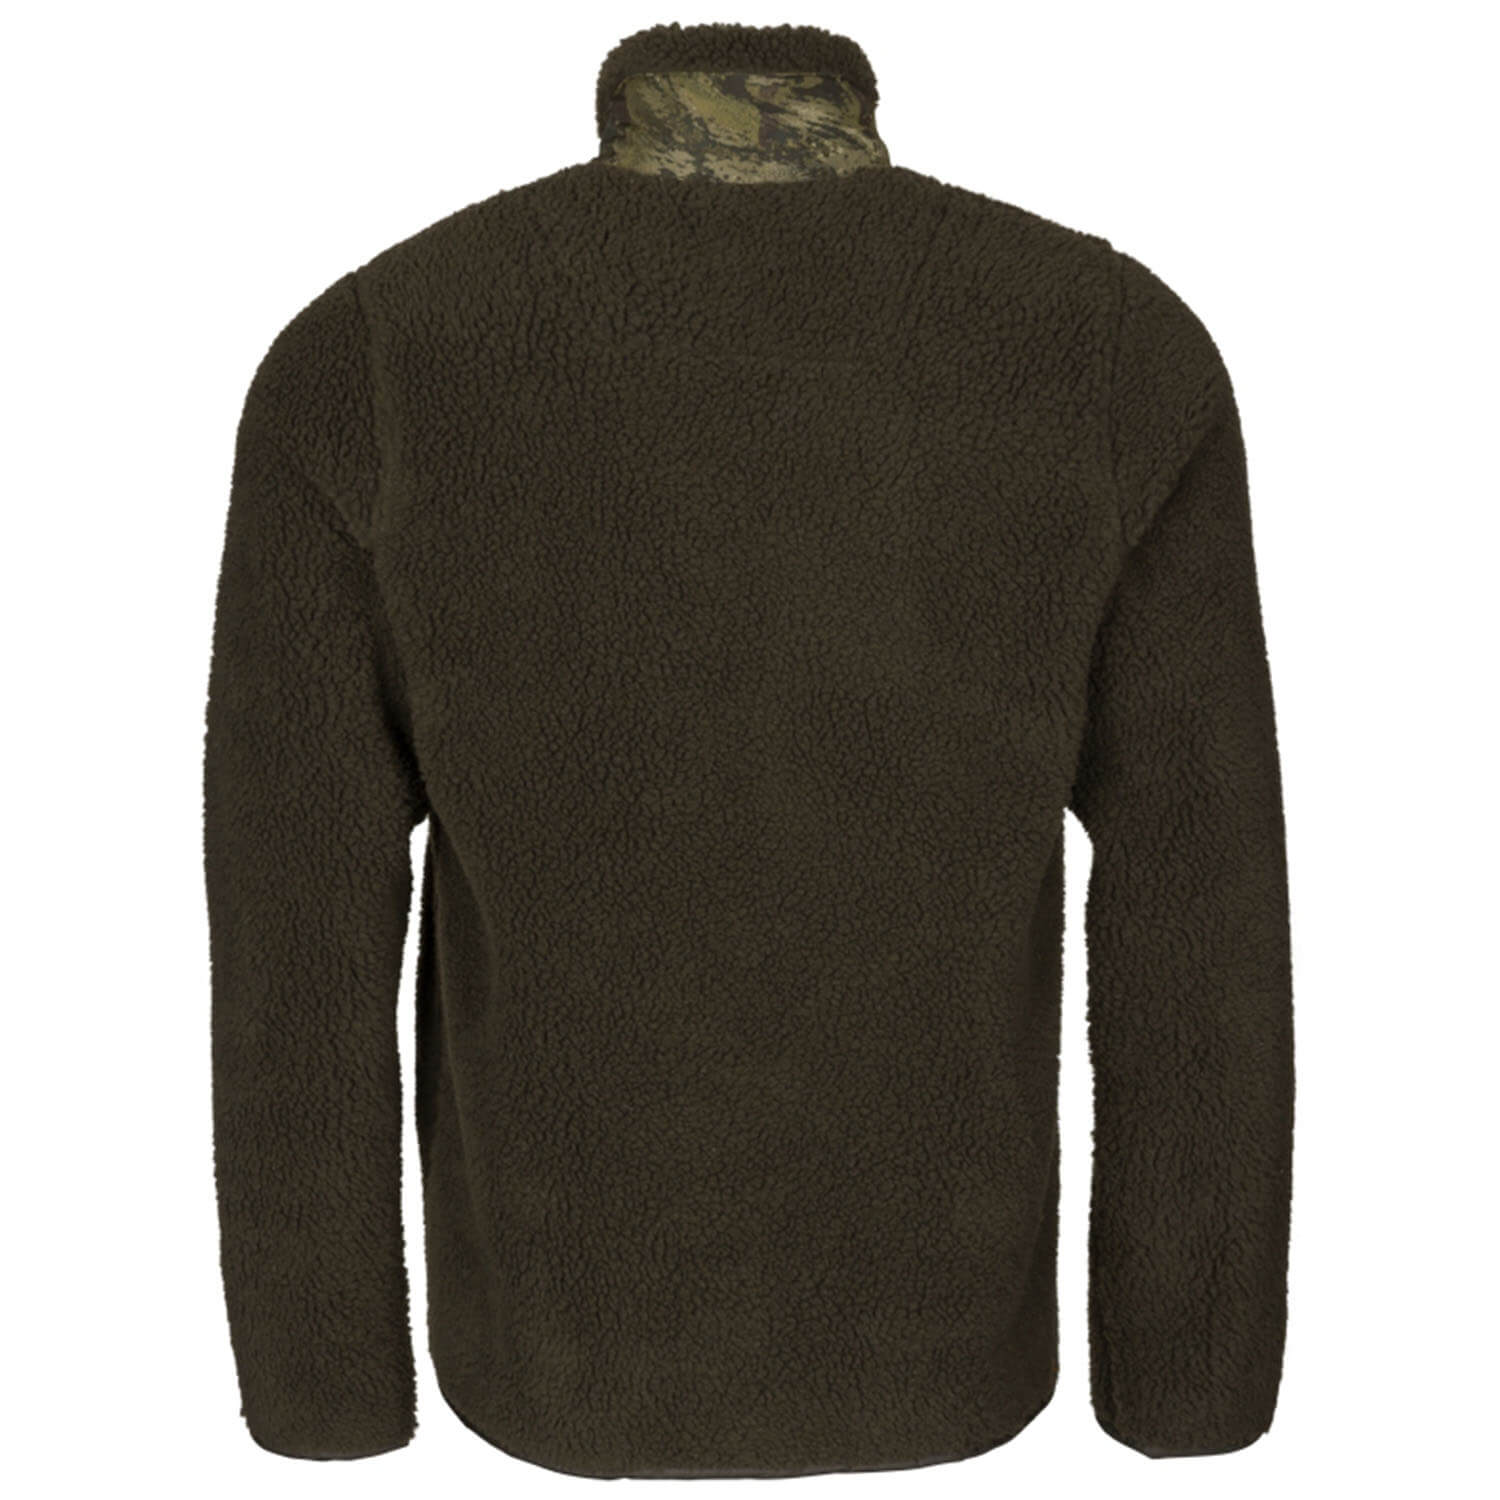  Seeland fleece jacket Zephyr (Grizzly Brown/InVis Green)